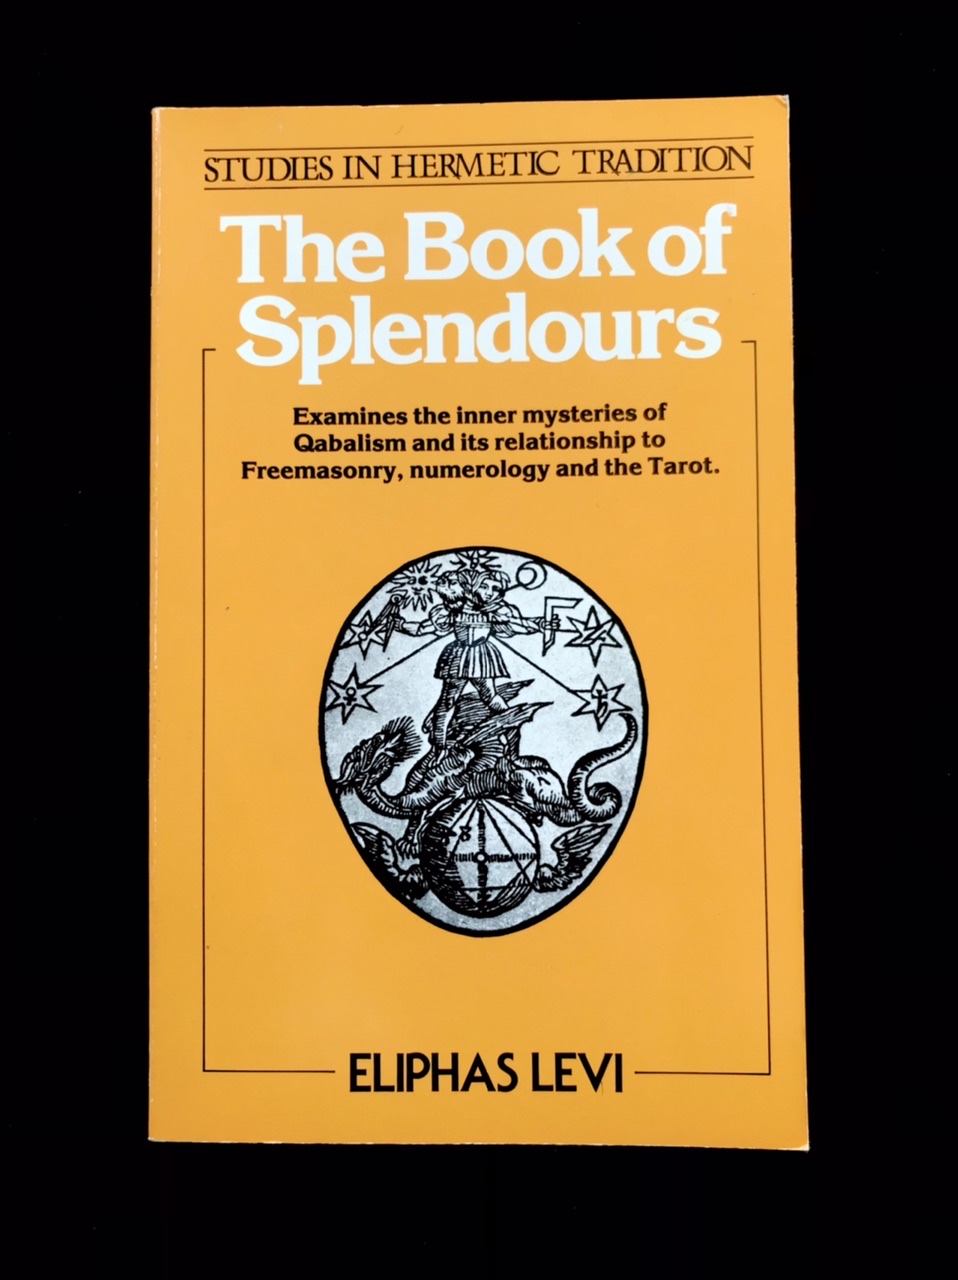 The Book of Splendours by Eliphas Levi